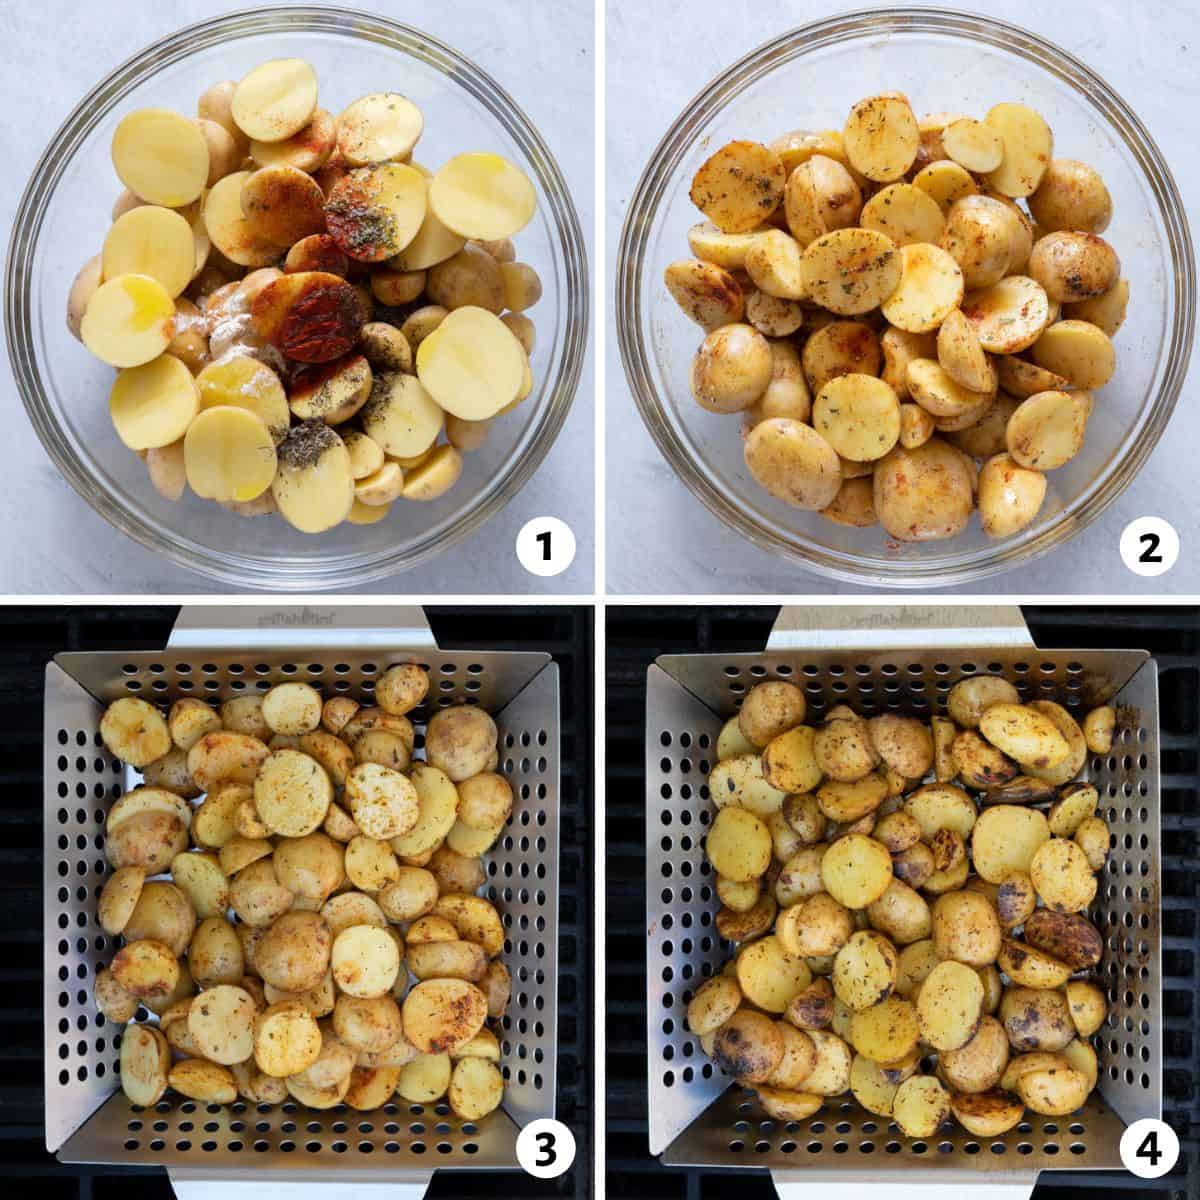 4 image collage showing baby potatoes cut in half in a bowl with seasonings, tossed with oil and seasonings, placed in a grill basket on the grill before and after cooked.